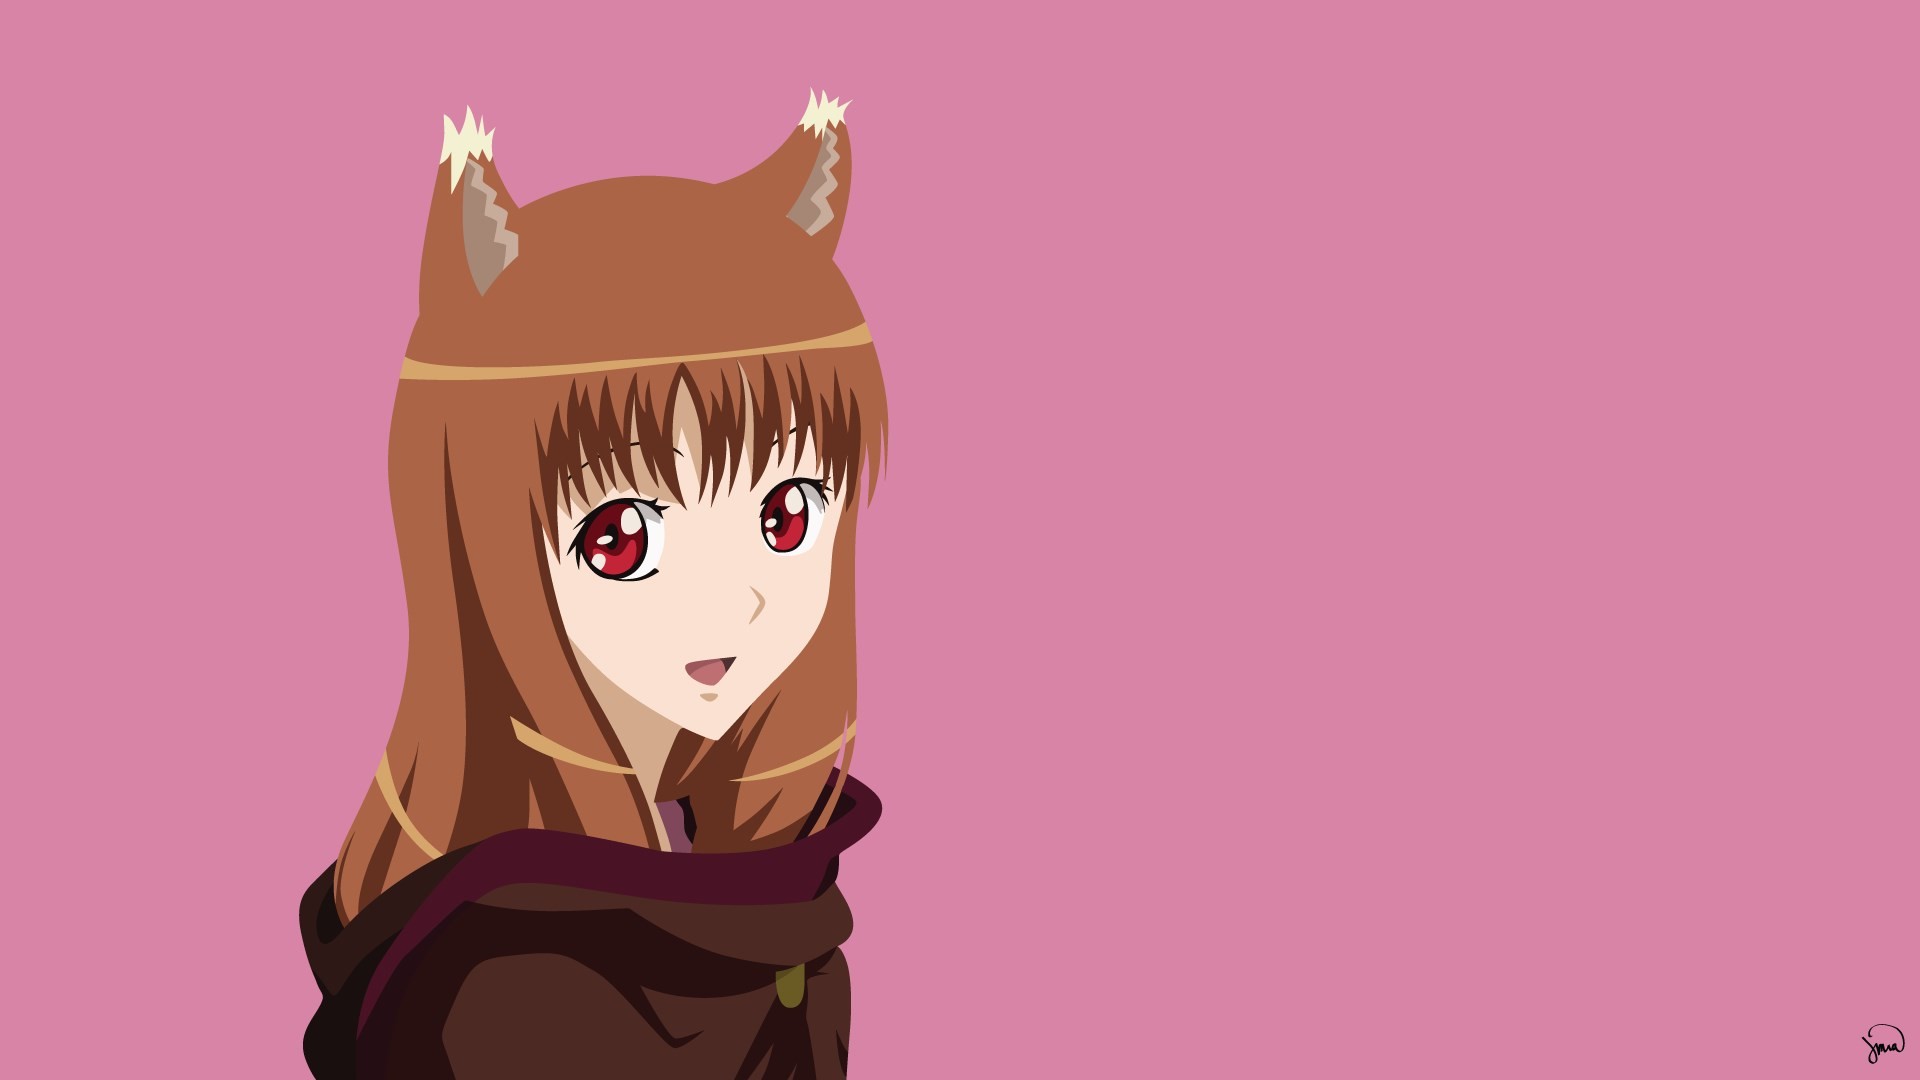 Spice and wolf desktop backgrounds wallpaper – spice and wolf category